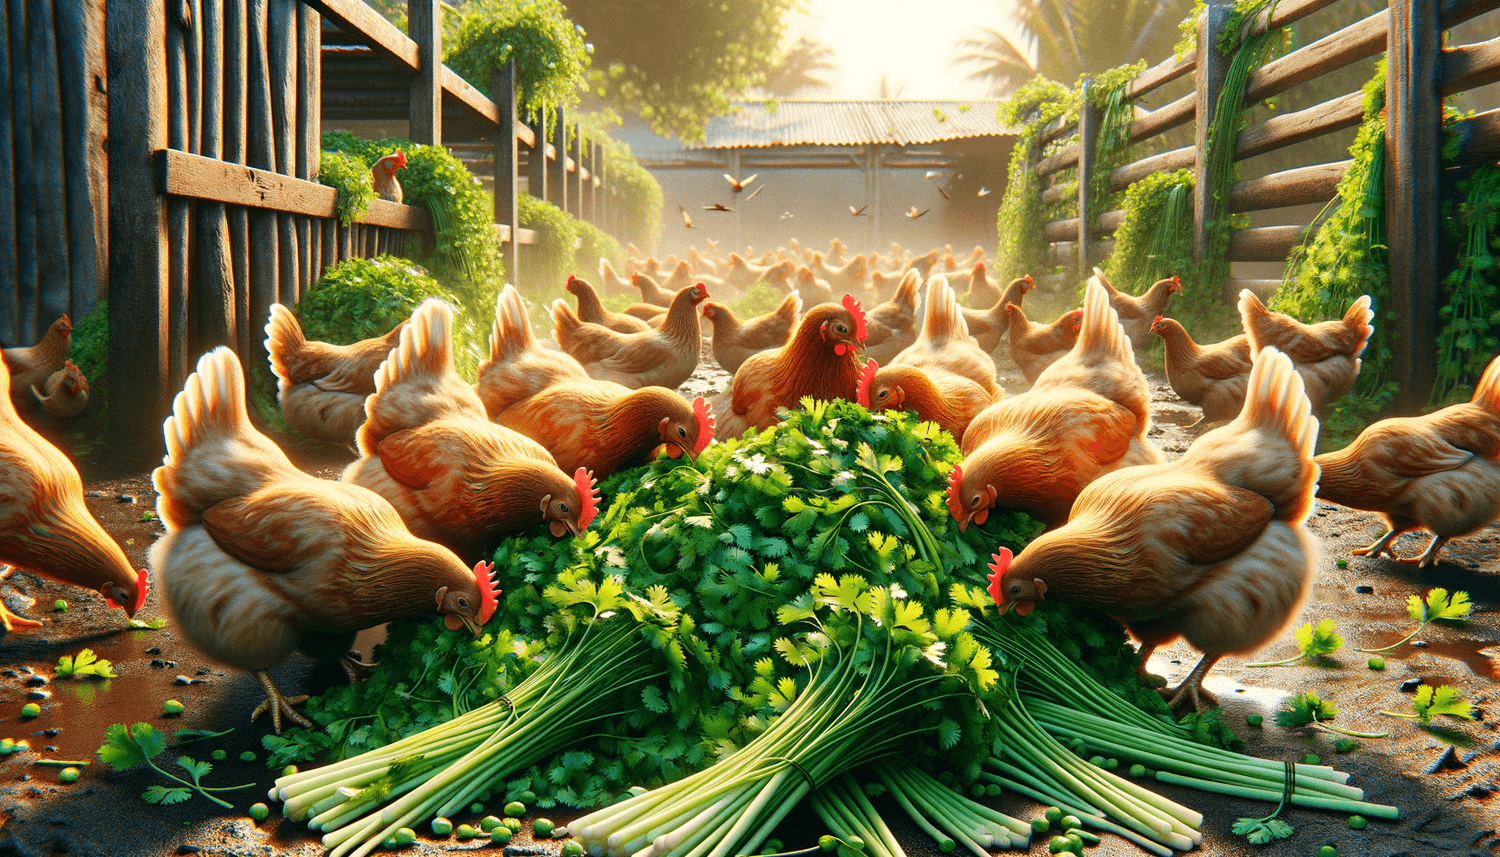 Can Chickens Eat Cilantro Stems?